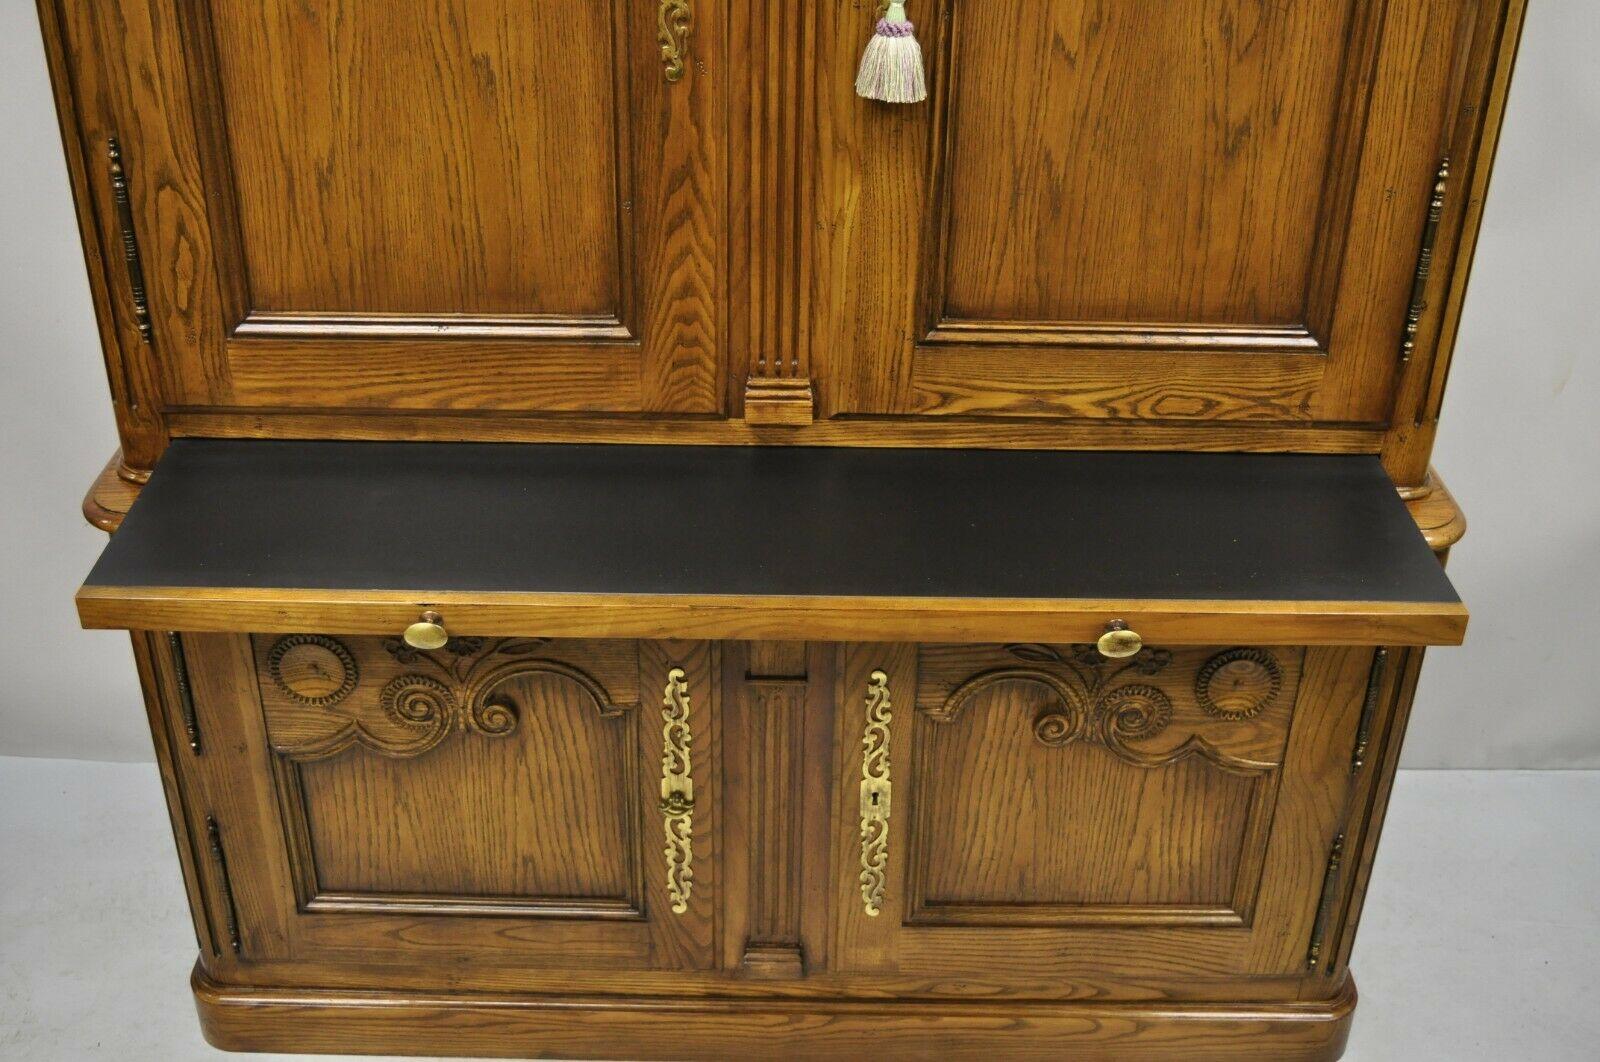 Baker Country French Provincial Oak Wood Lighted Bar Cabinet Display Buffet 3